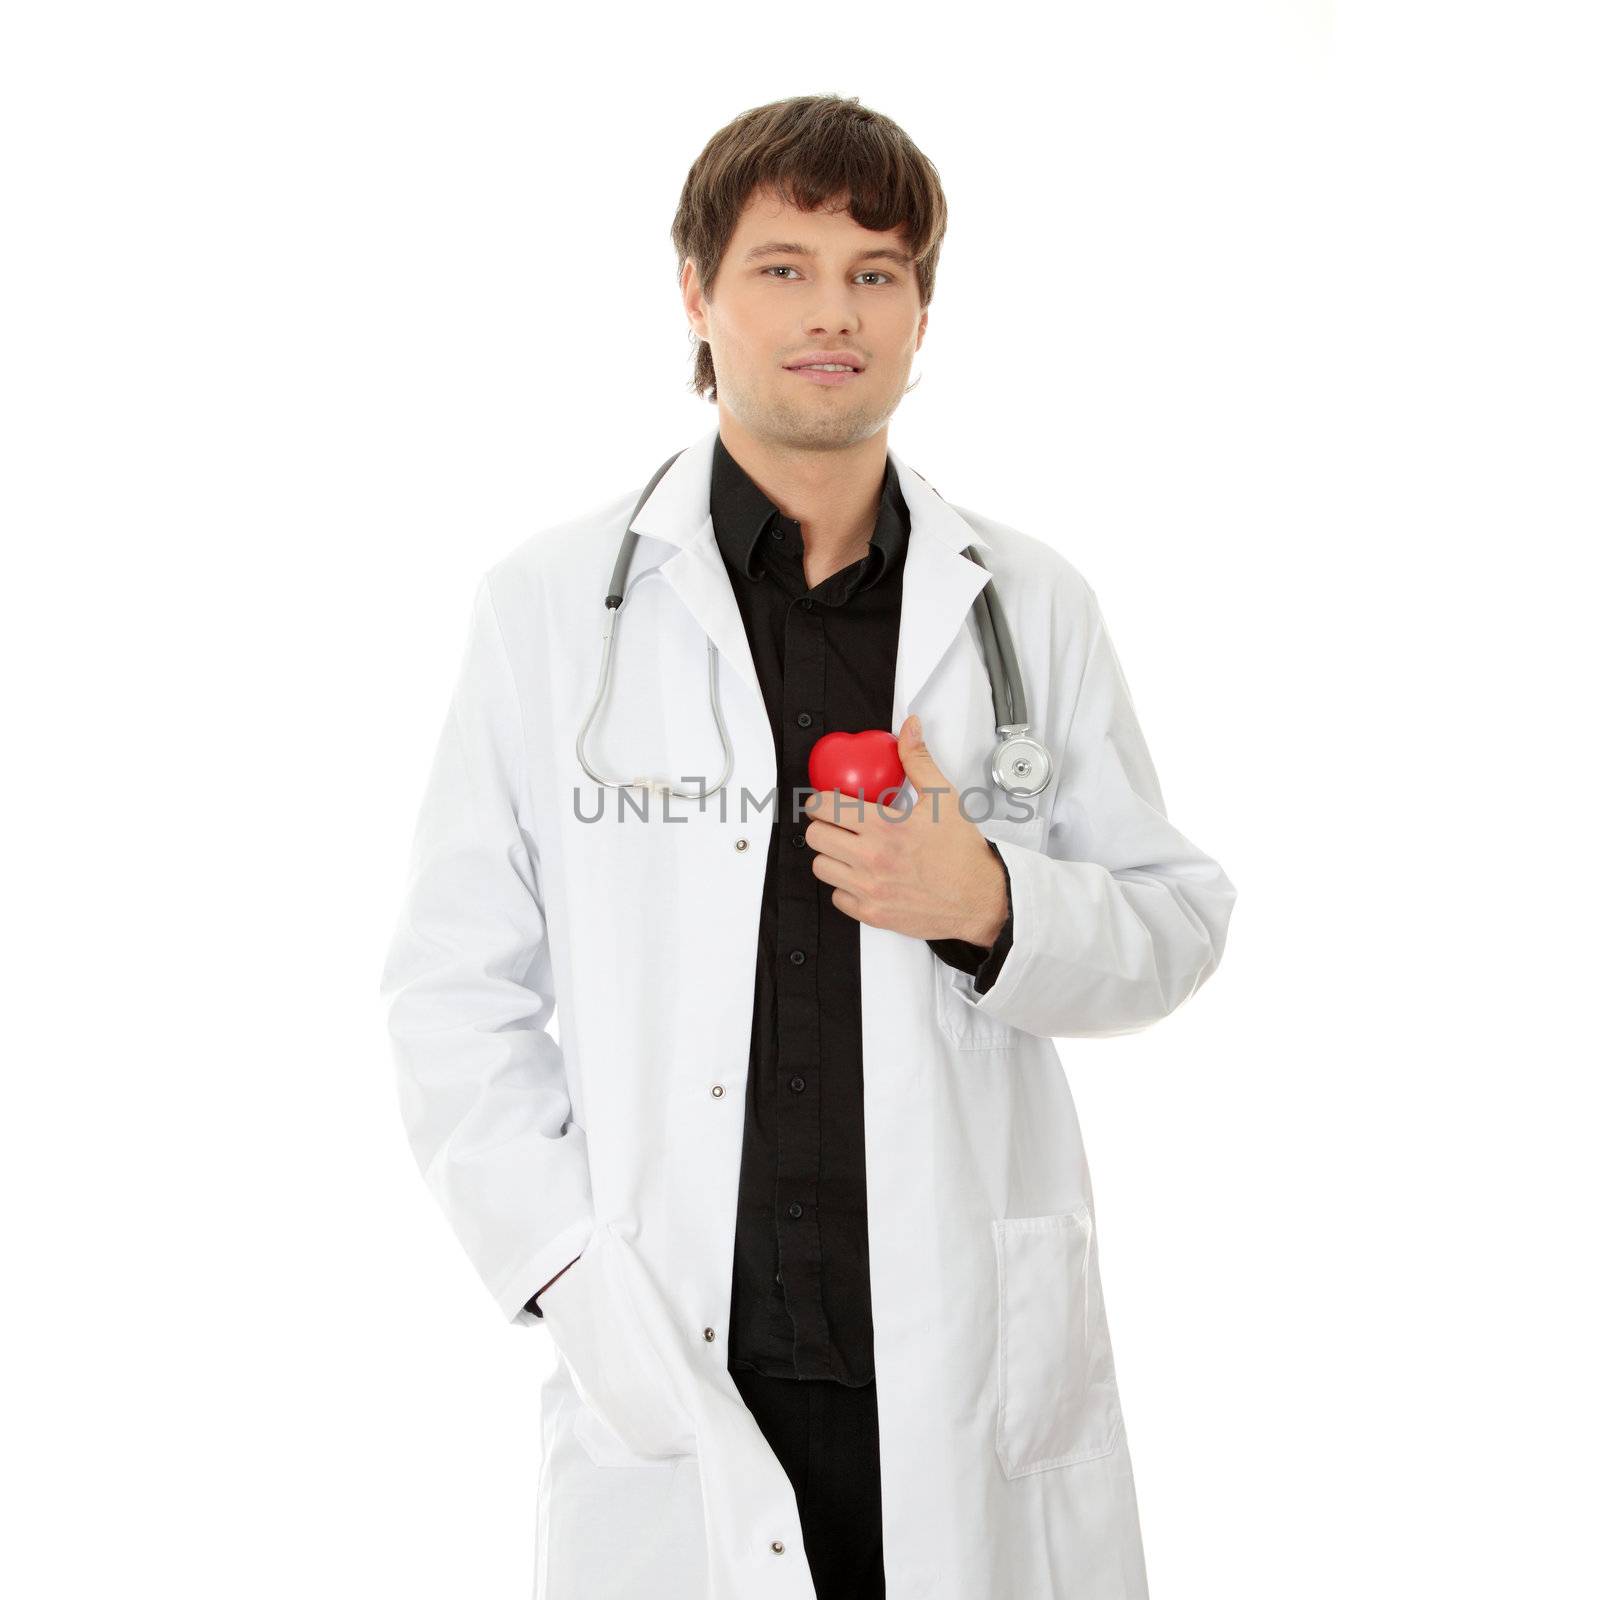 Handsome young male doctor holding heart shape toy, isolated on white